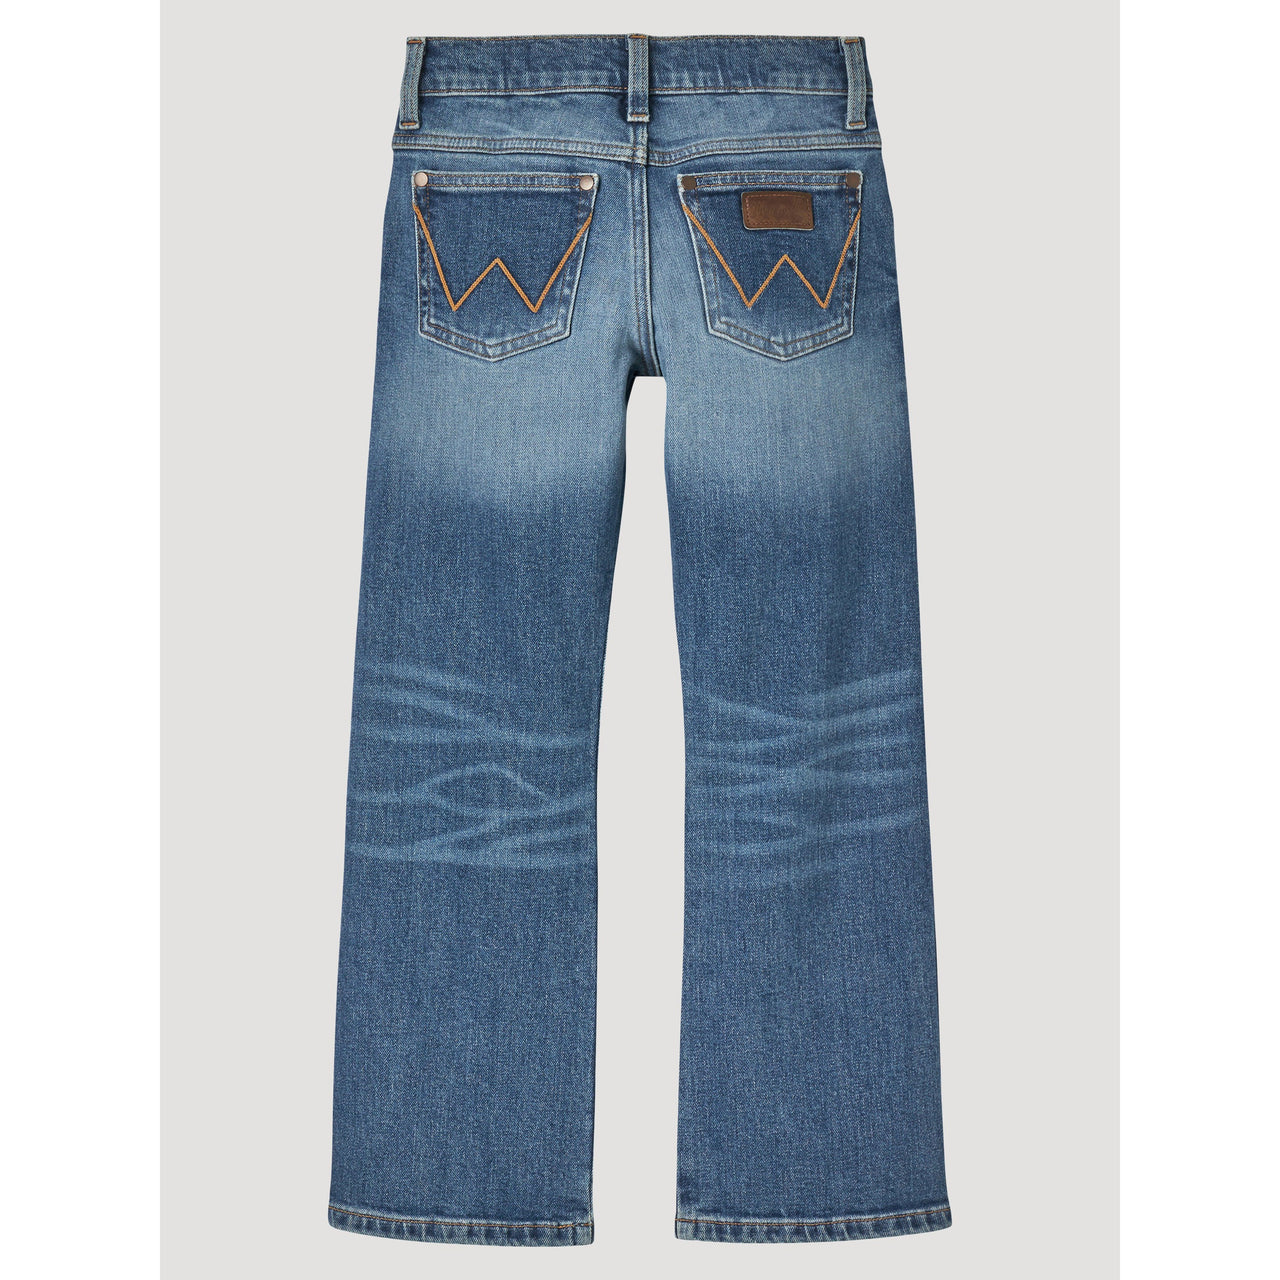 Wrangler Boy's Retro Relaxed Bootcut Jeans - Andalusian